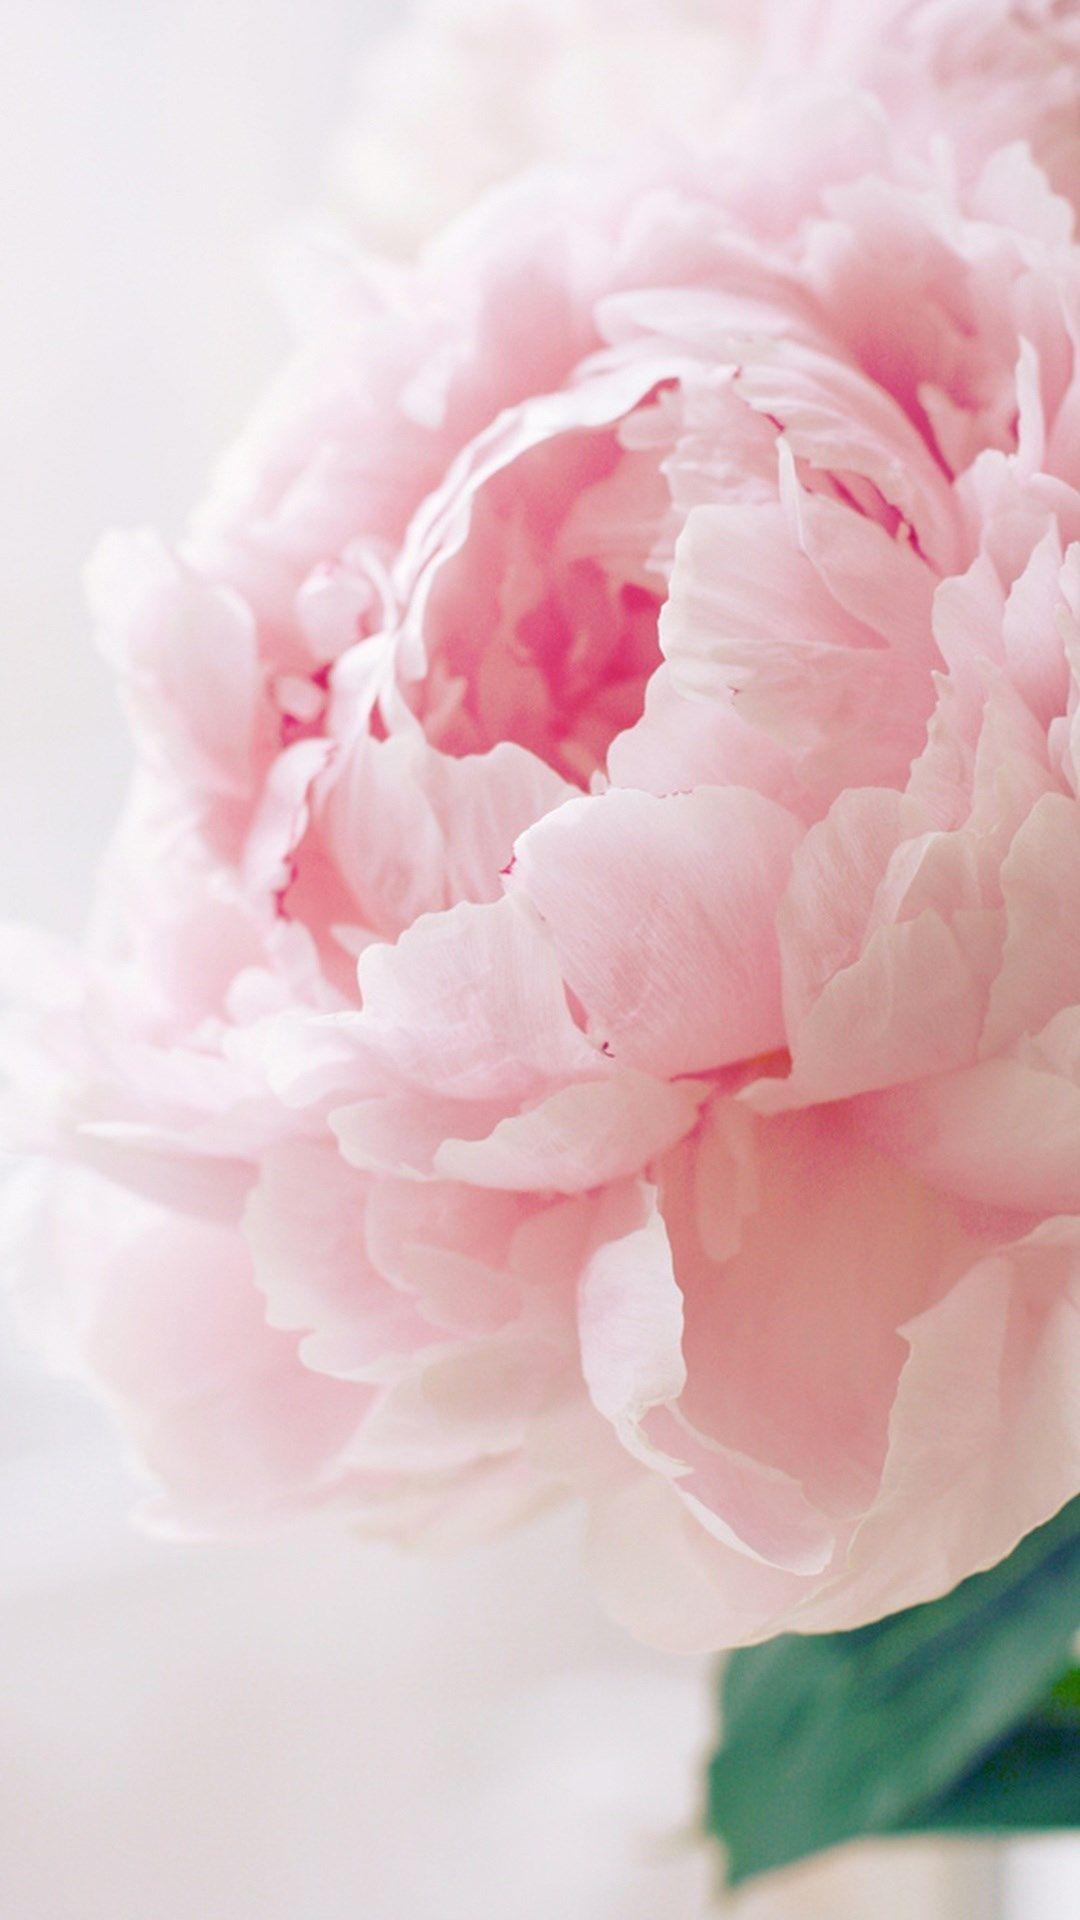 Pink Peonies iPhone wallpaper. Background & Quotes